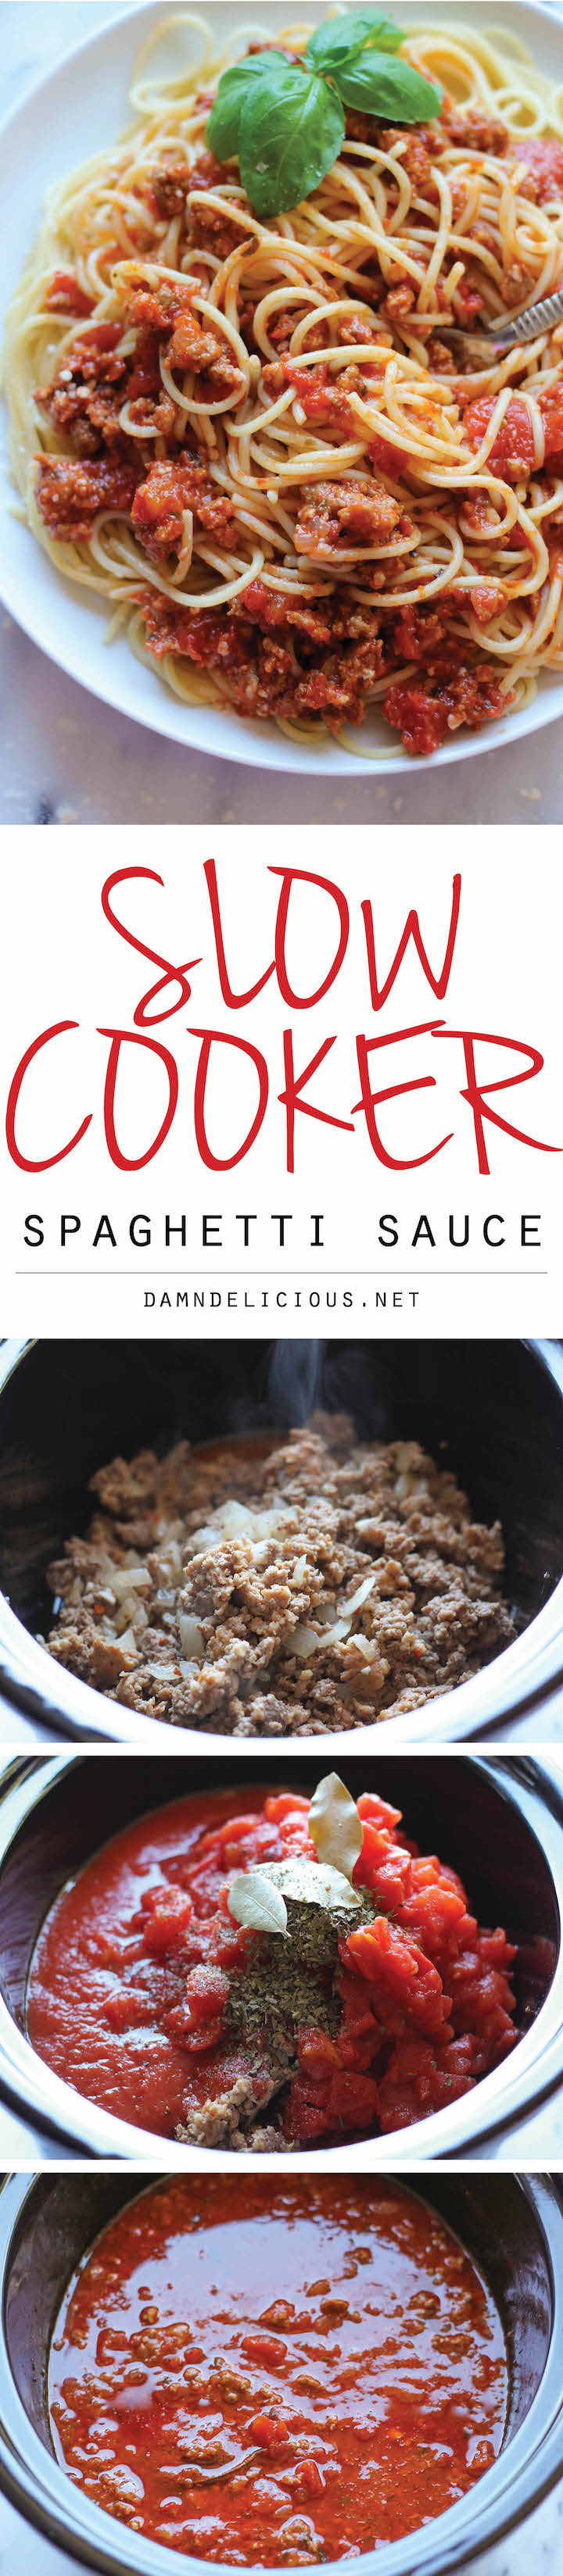 Slow Cooker Spaghetti Sauce - A rich and meaty spaghetti sauce easily made in the crockpot with just 10 min prep!